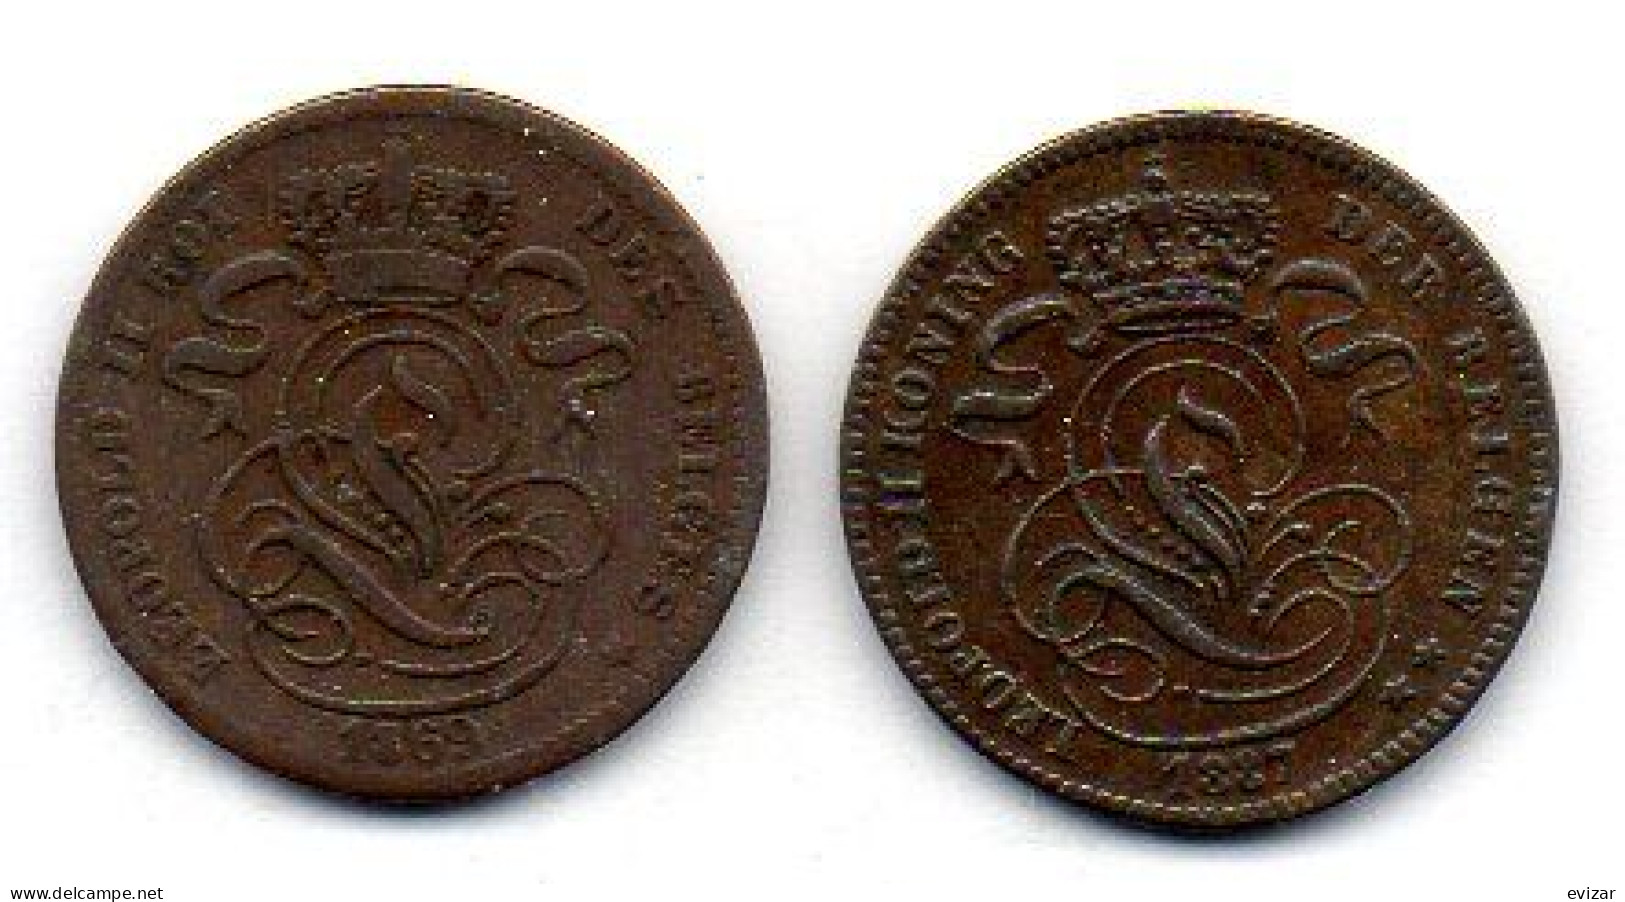 BELGIUM - Set Of Two Coins 2 Centimes, Copper, Year 1835, KM # 4.1, 4.2, Wide & Narrow Rims - 2 Cents